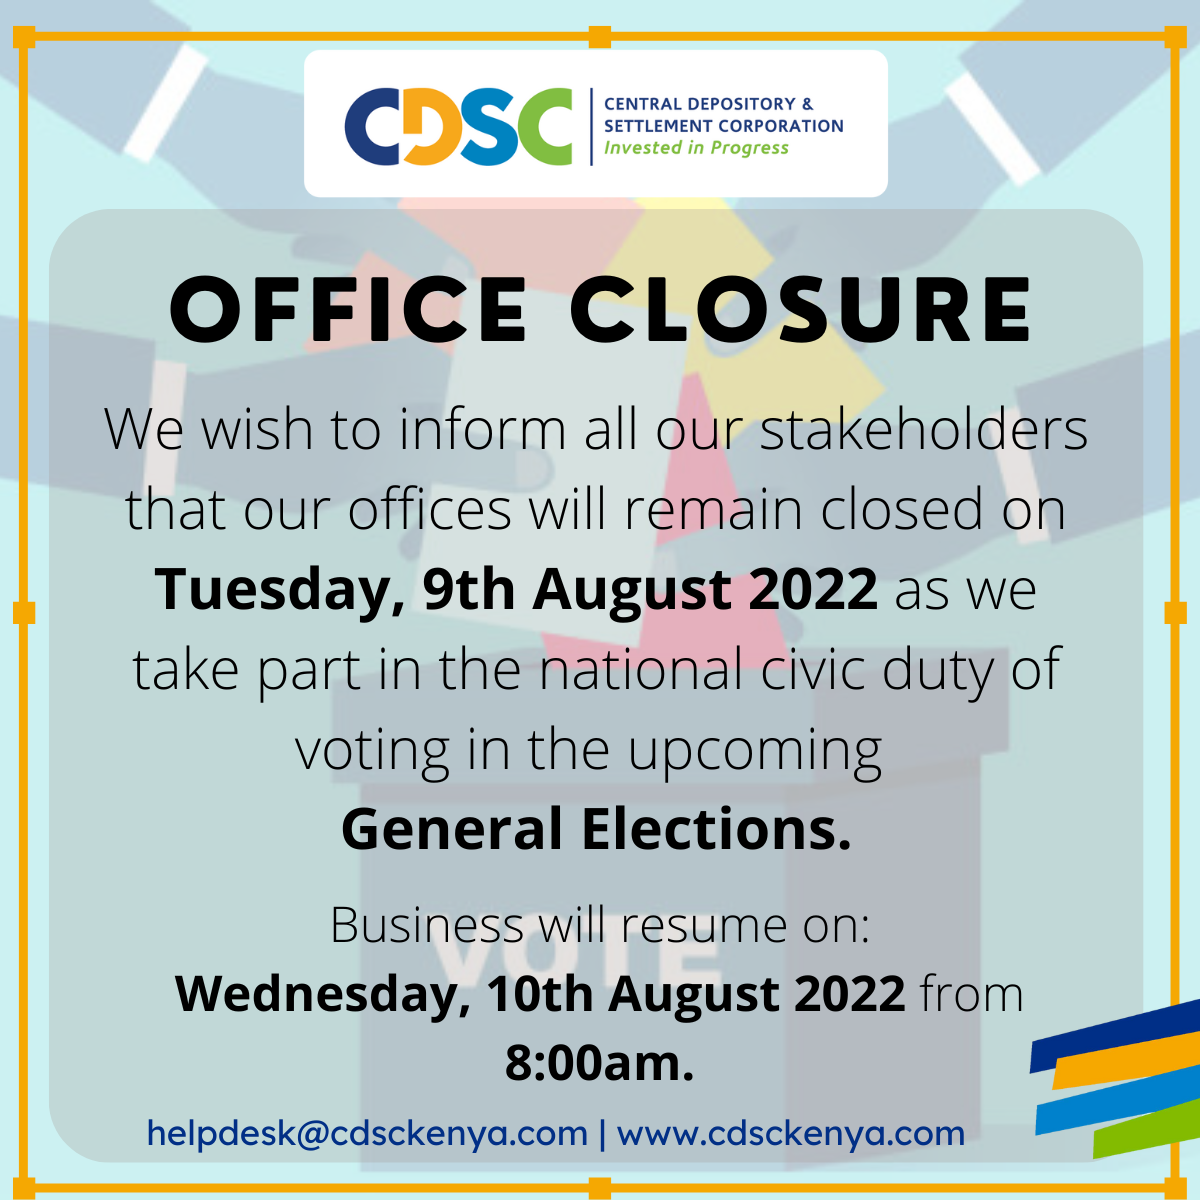 OFFICE CLOSURE FOR ELECTIONS